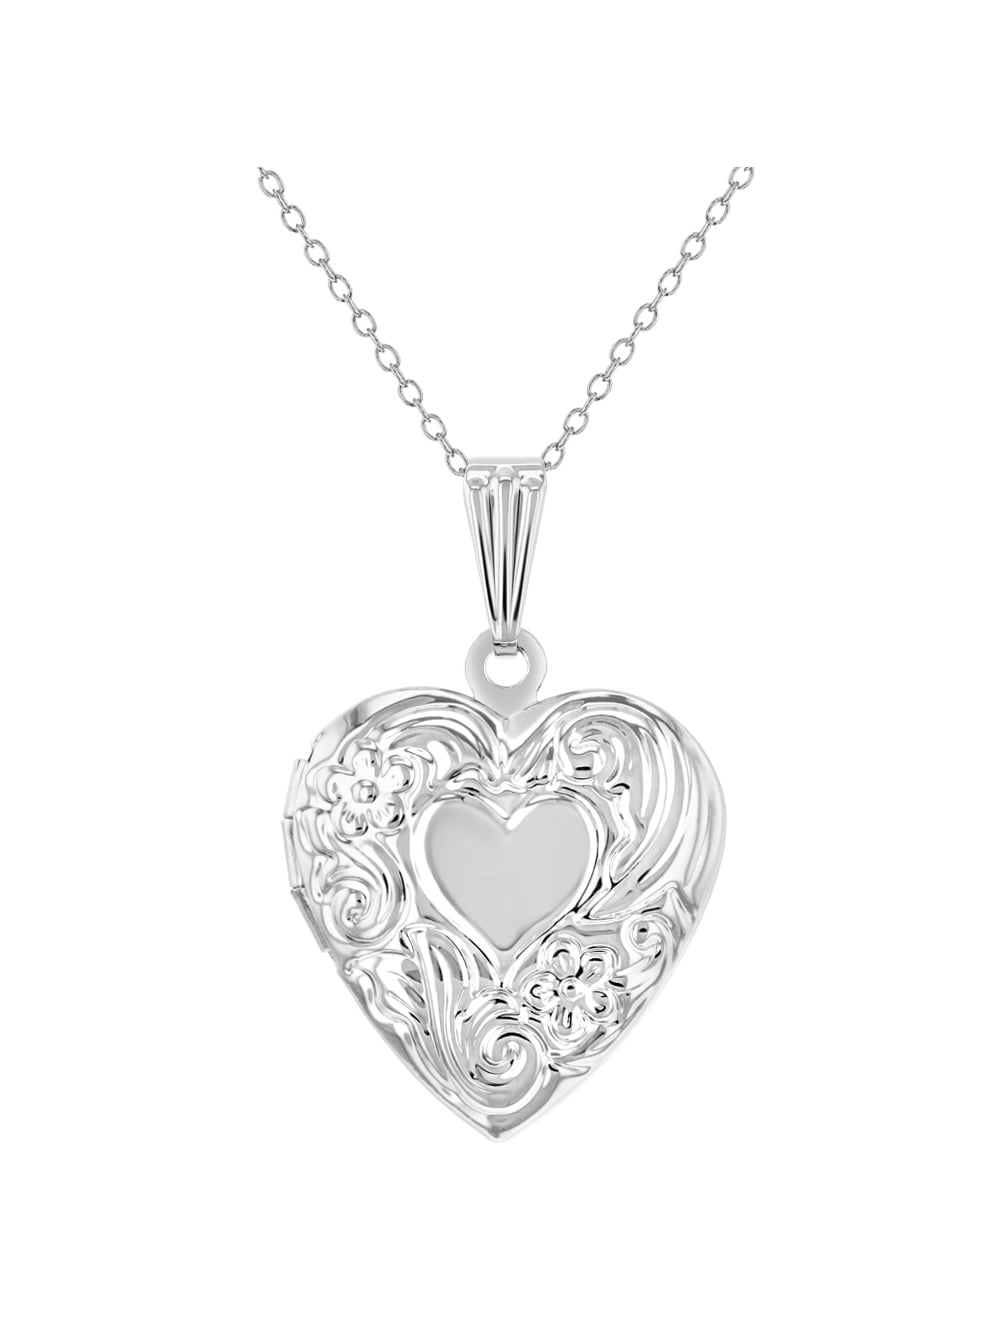 in Memory of My Husband Floating Charm for Heart Lockets